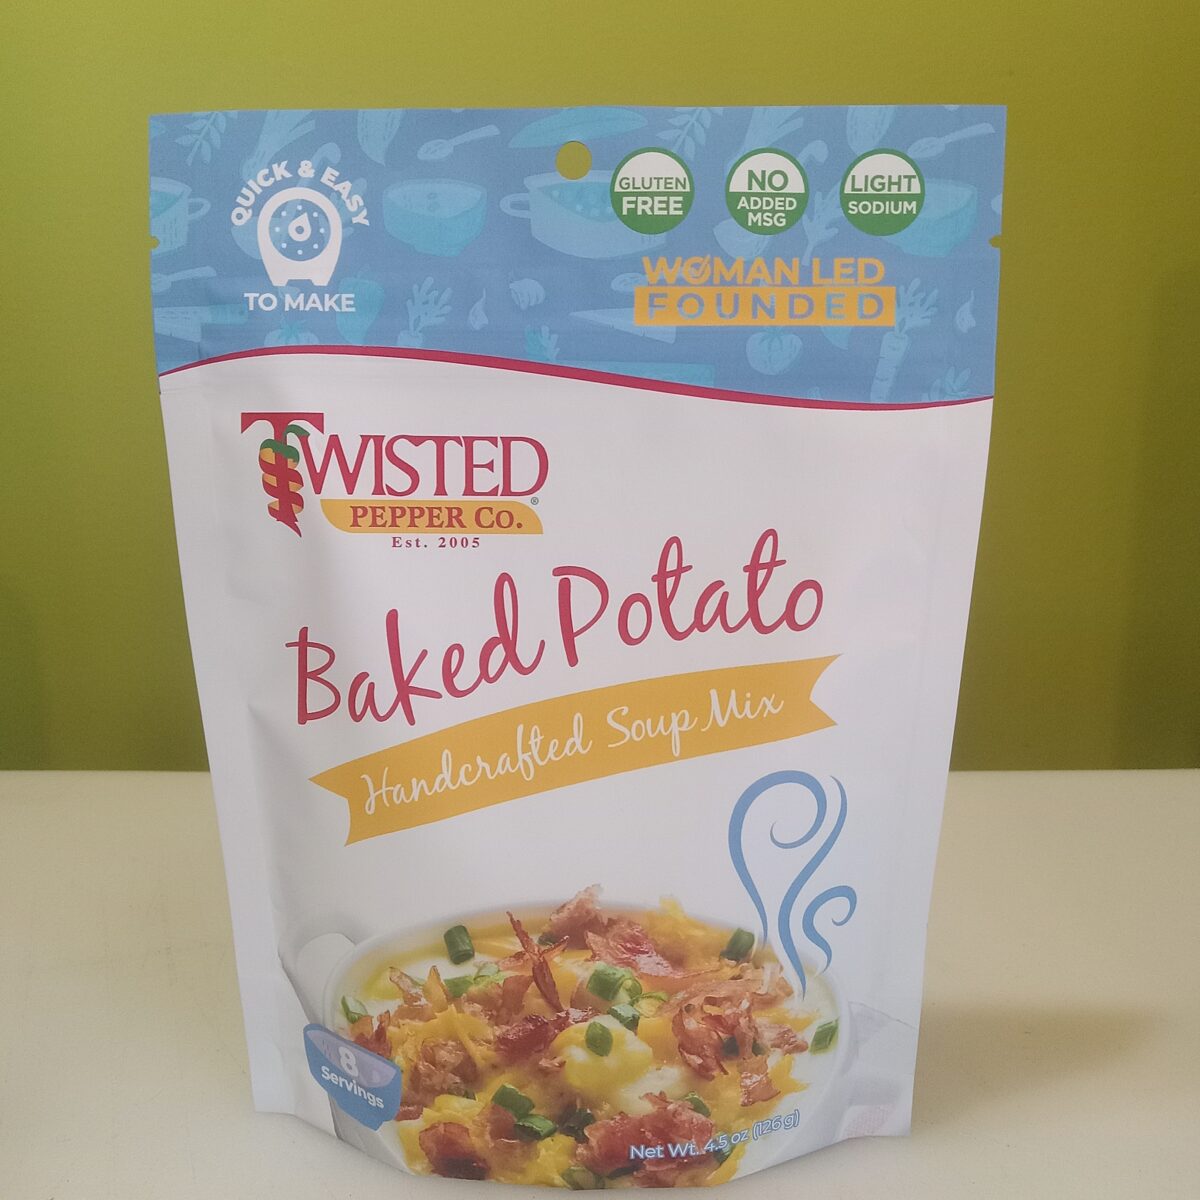 Baked Potato Soup Mix-Twisted Pepper